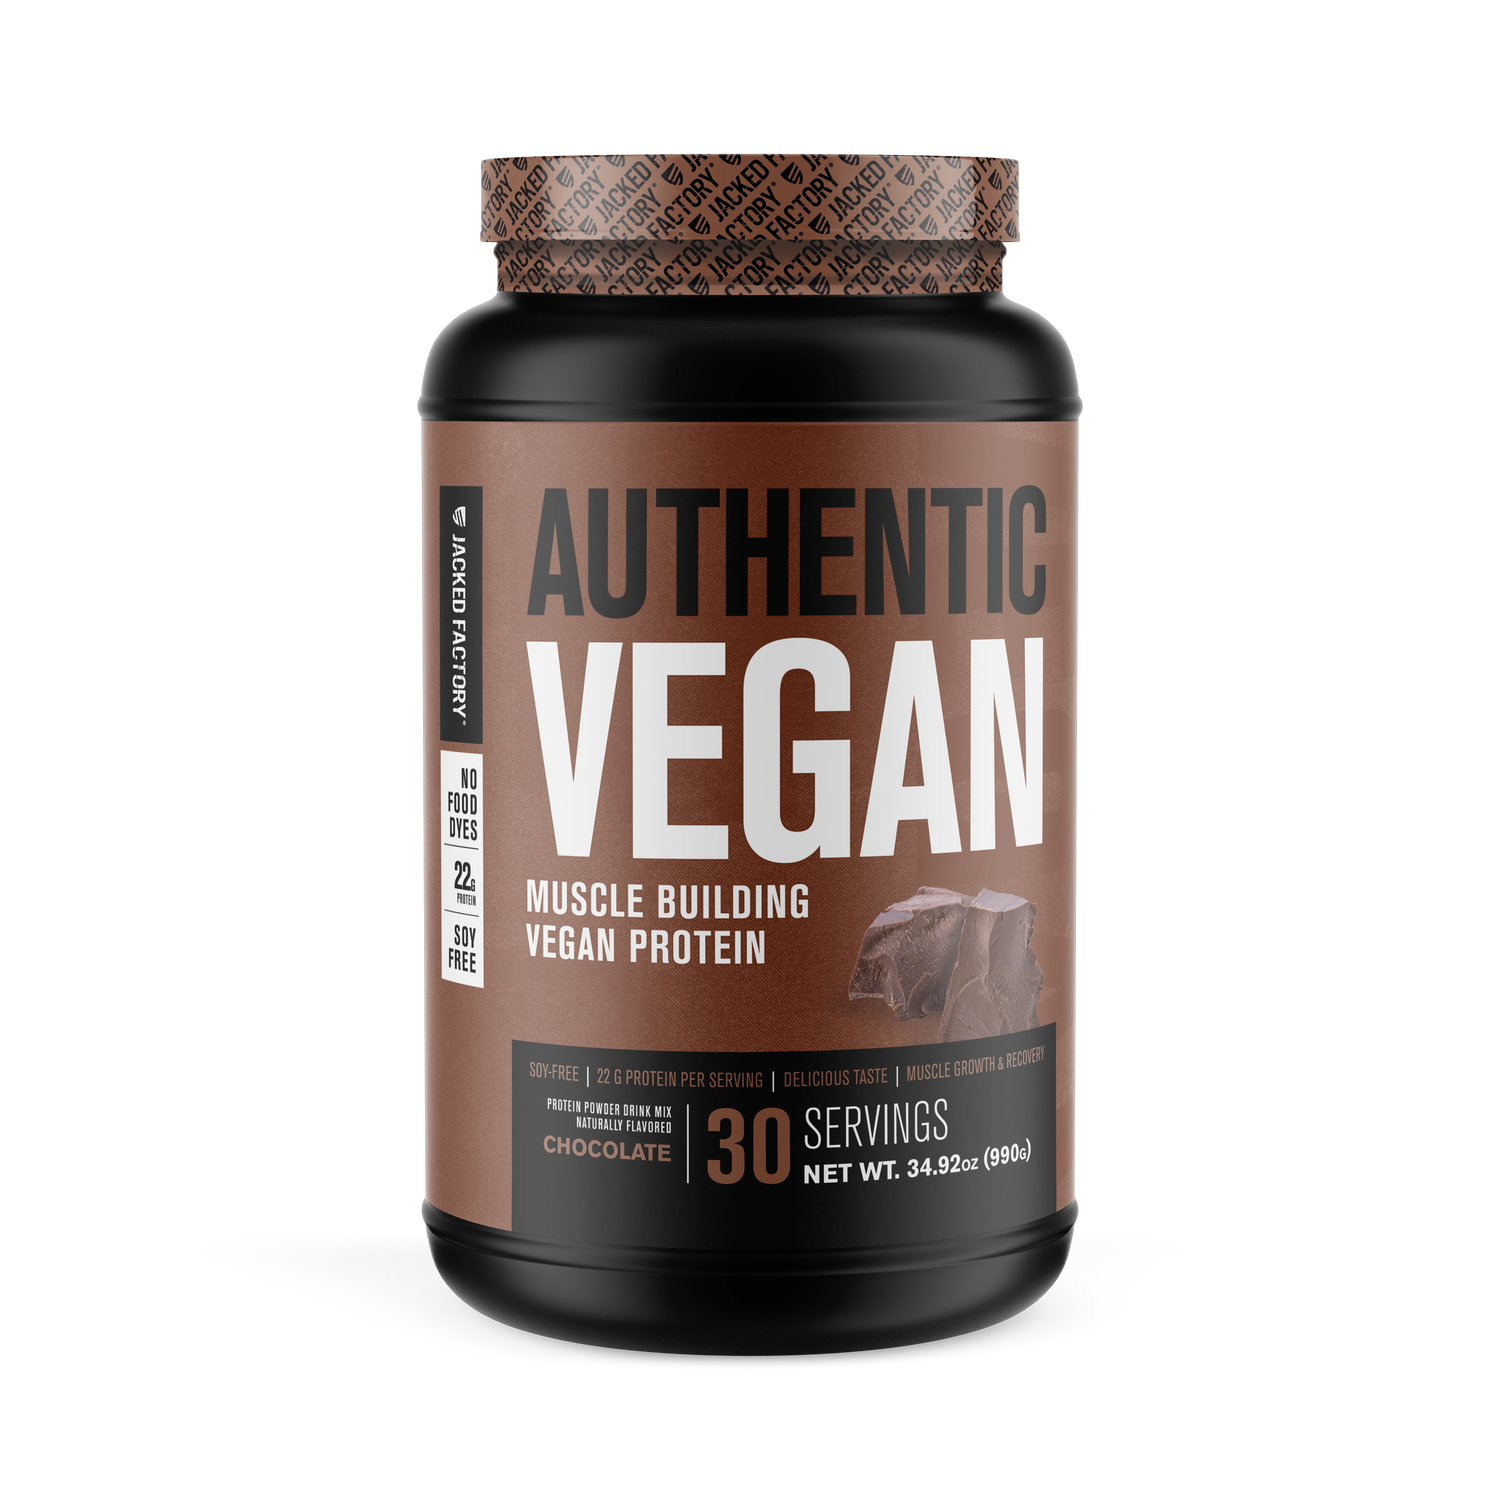 Jacked Factory's 30 servings Chocolate Authentic Vegan in a black tub with cream coloured label showing a chocolate chunk image